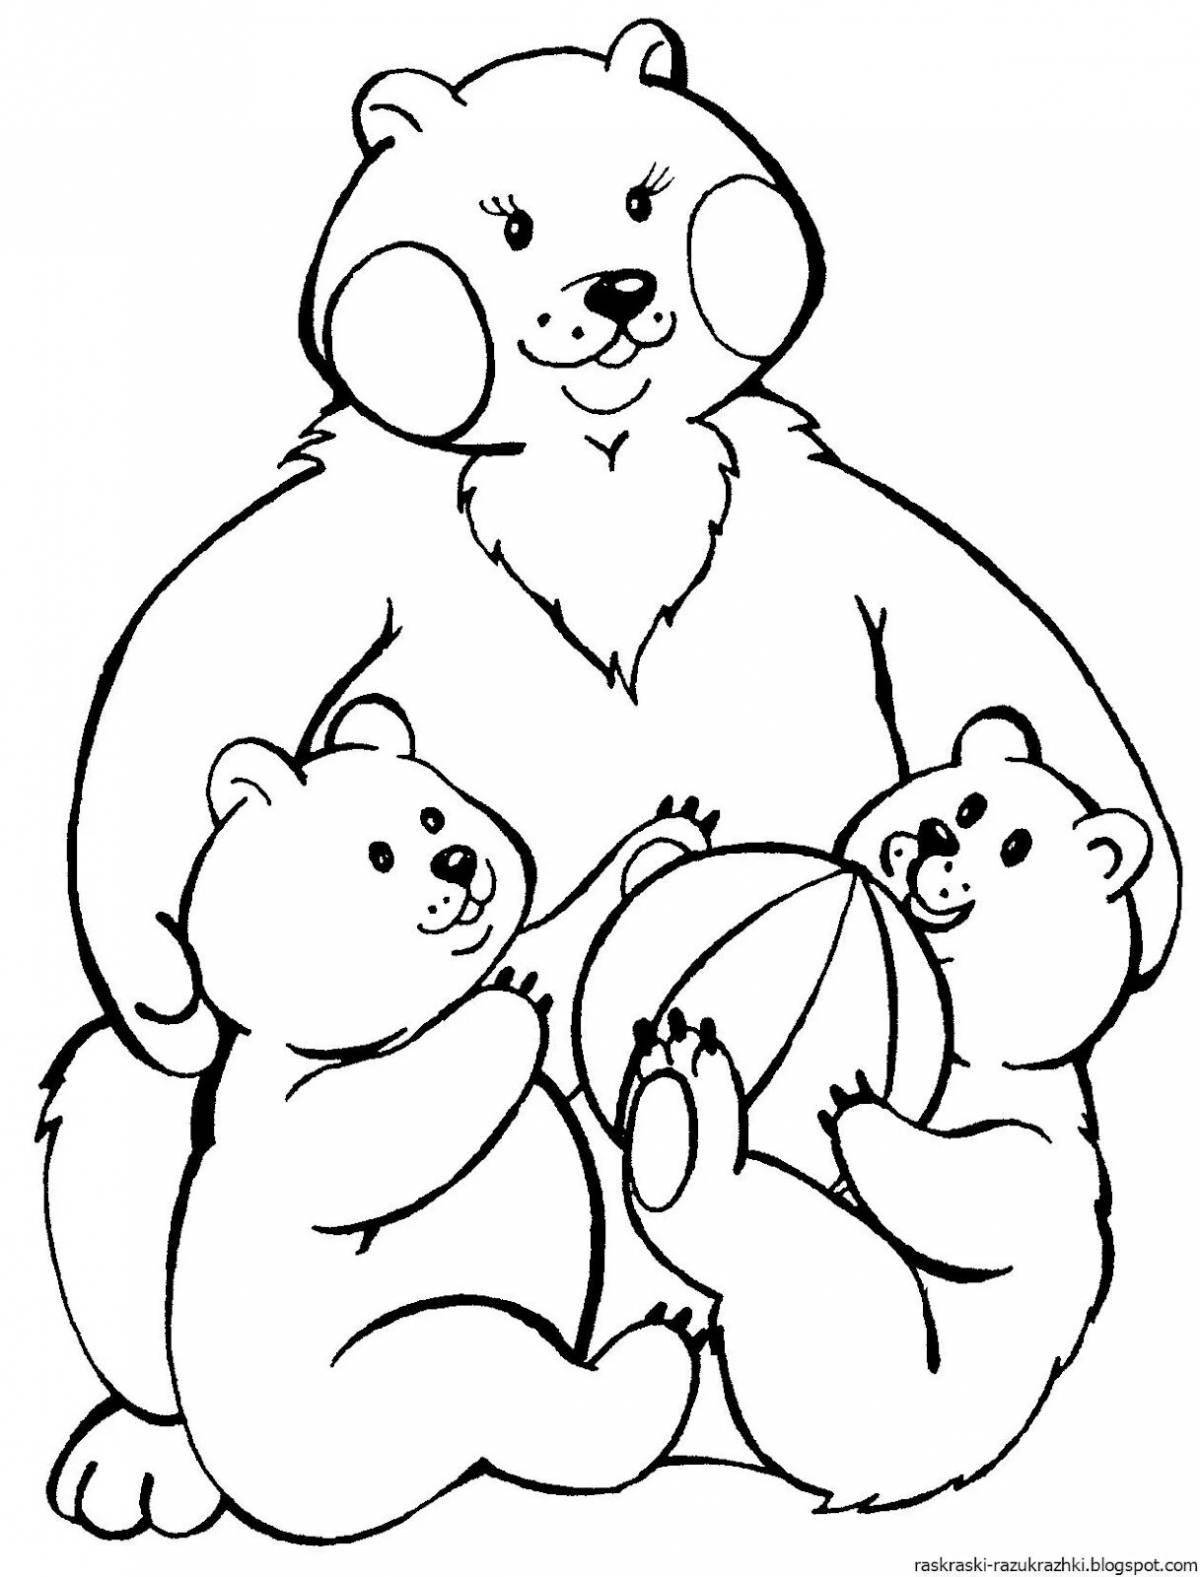 Coloring book family of bright bears